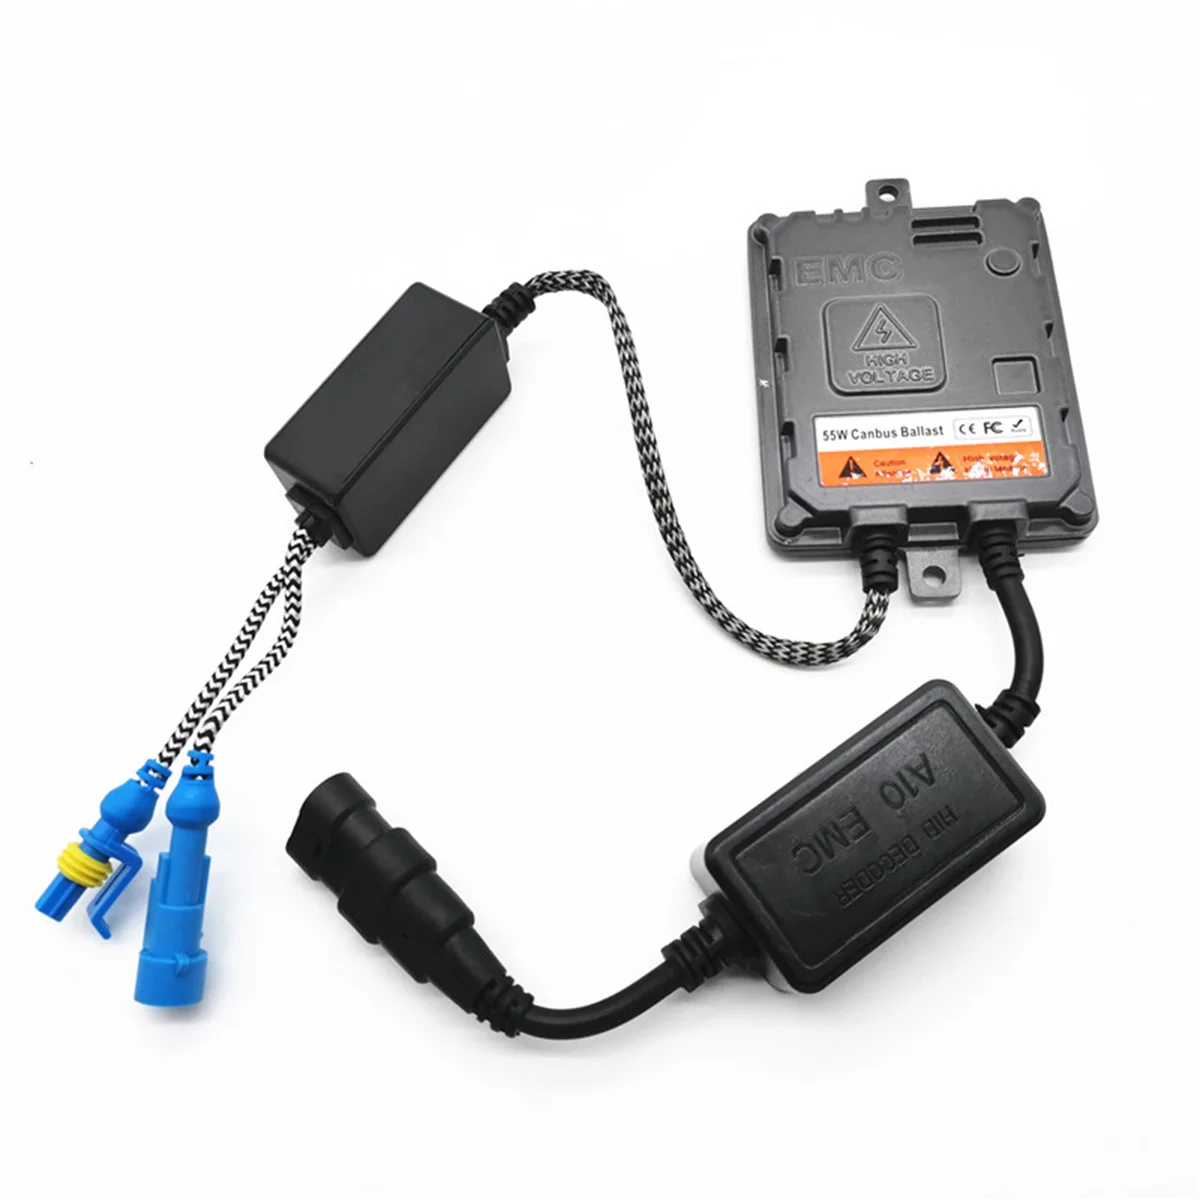 

HID Decoder Canbus Ballast Error Free for 12V 55W Full Digital Ultra Canbus H1 H4 H7 H3 H8 H3 H11 9004 9005 Canbus